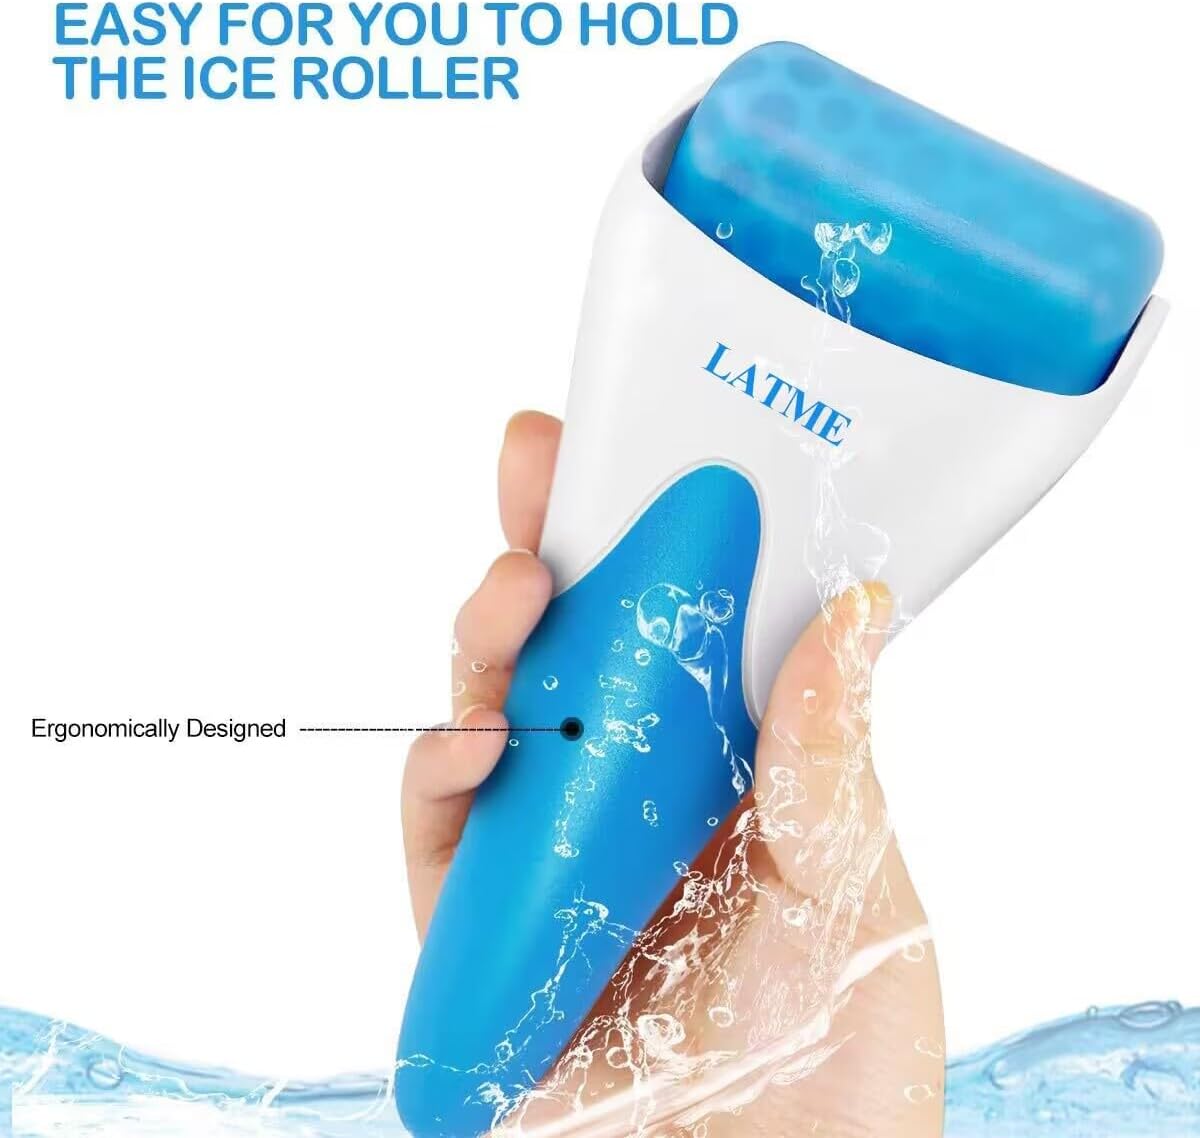 LATME Ice Roller for Face Eyes,Womens Gifts,Face Massager Roller Puffiness Migraine Pain Relief and Minor Injury (Blue)